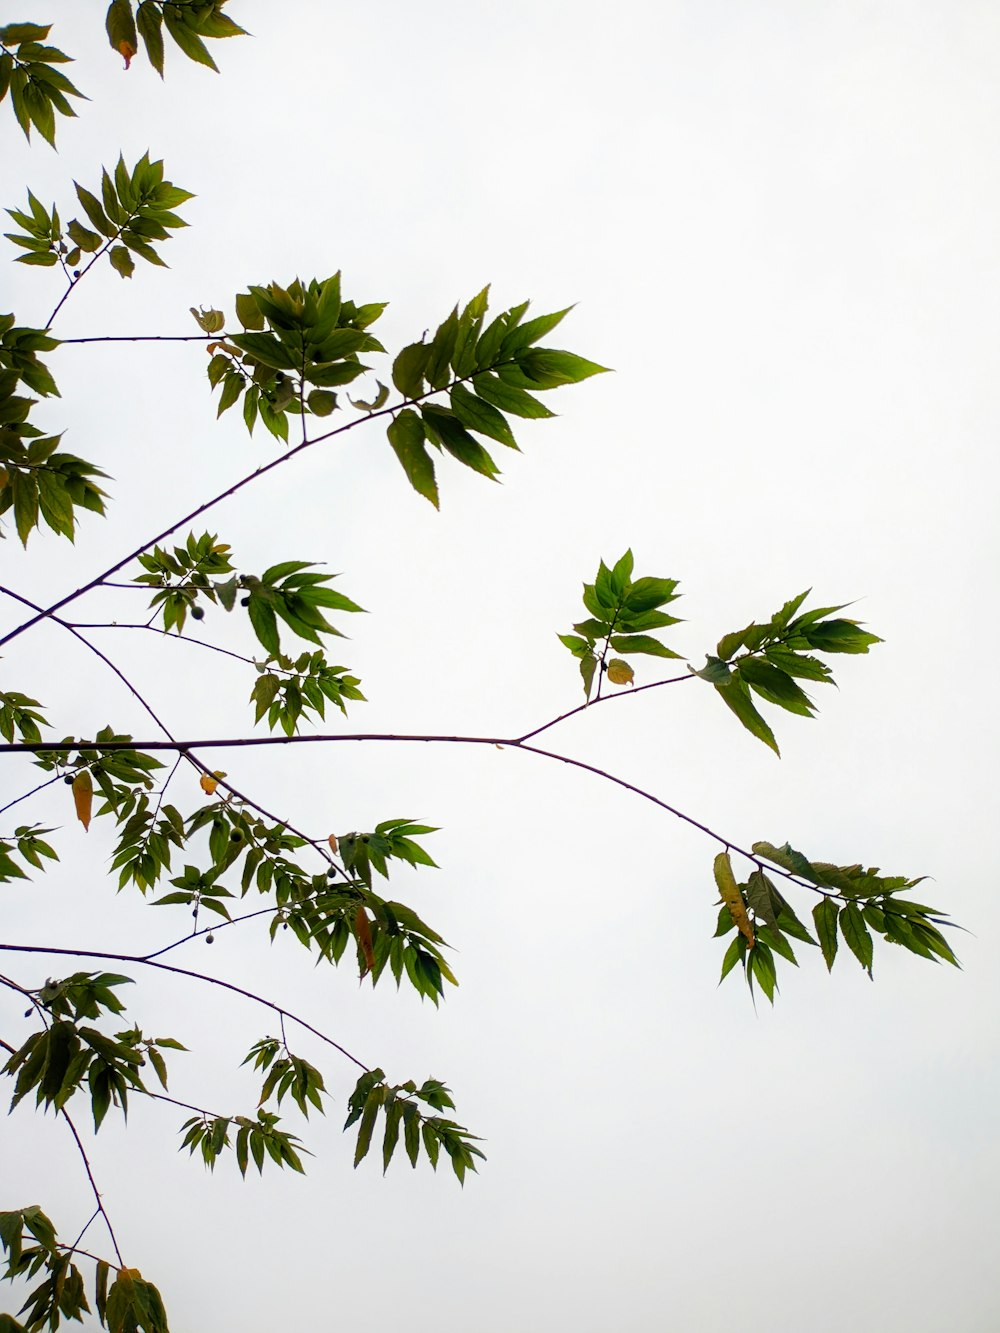 a tree branch with green leaves against a white sky